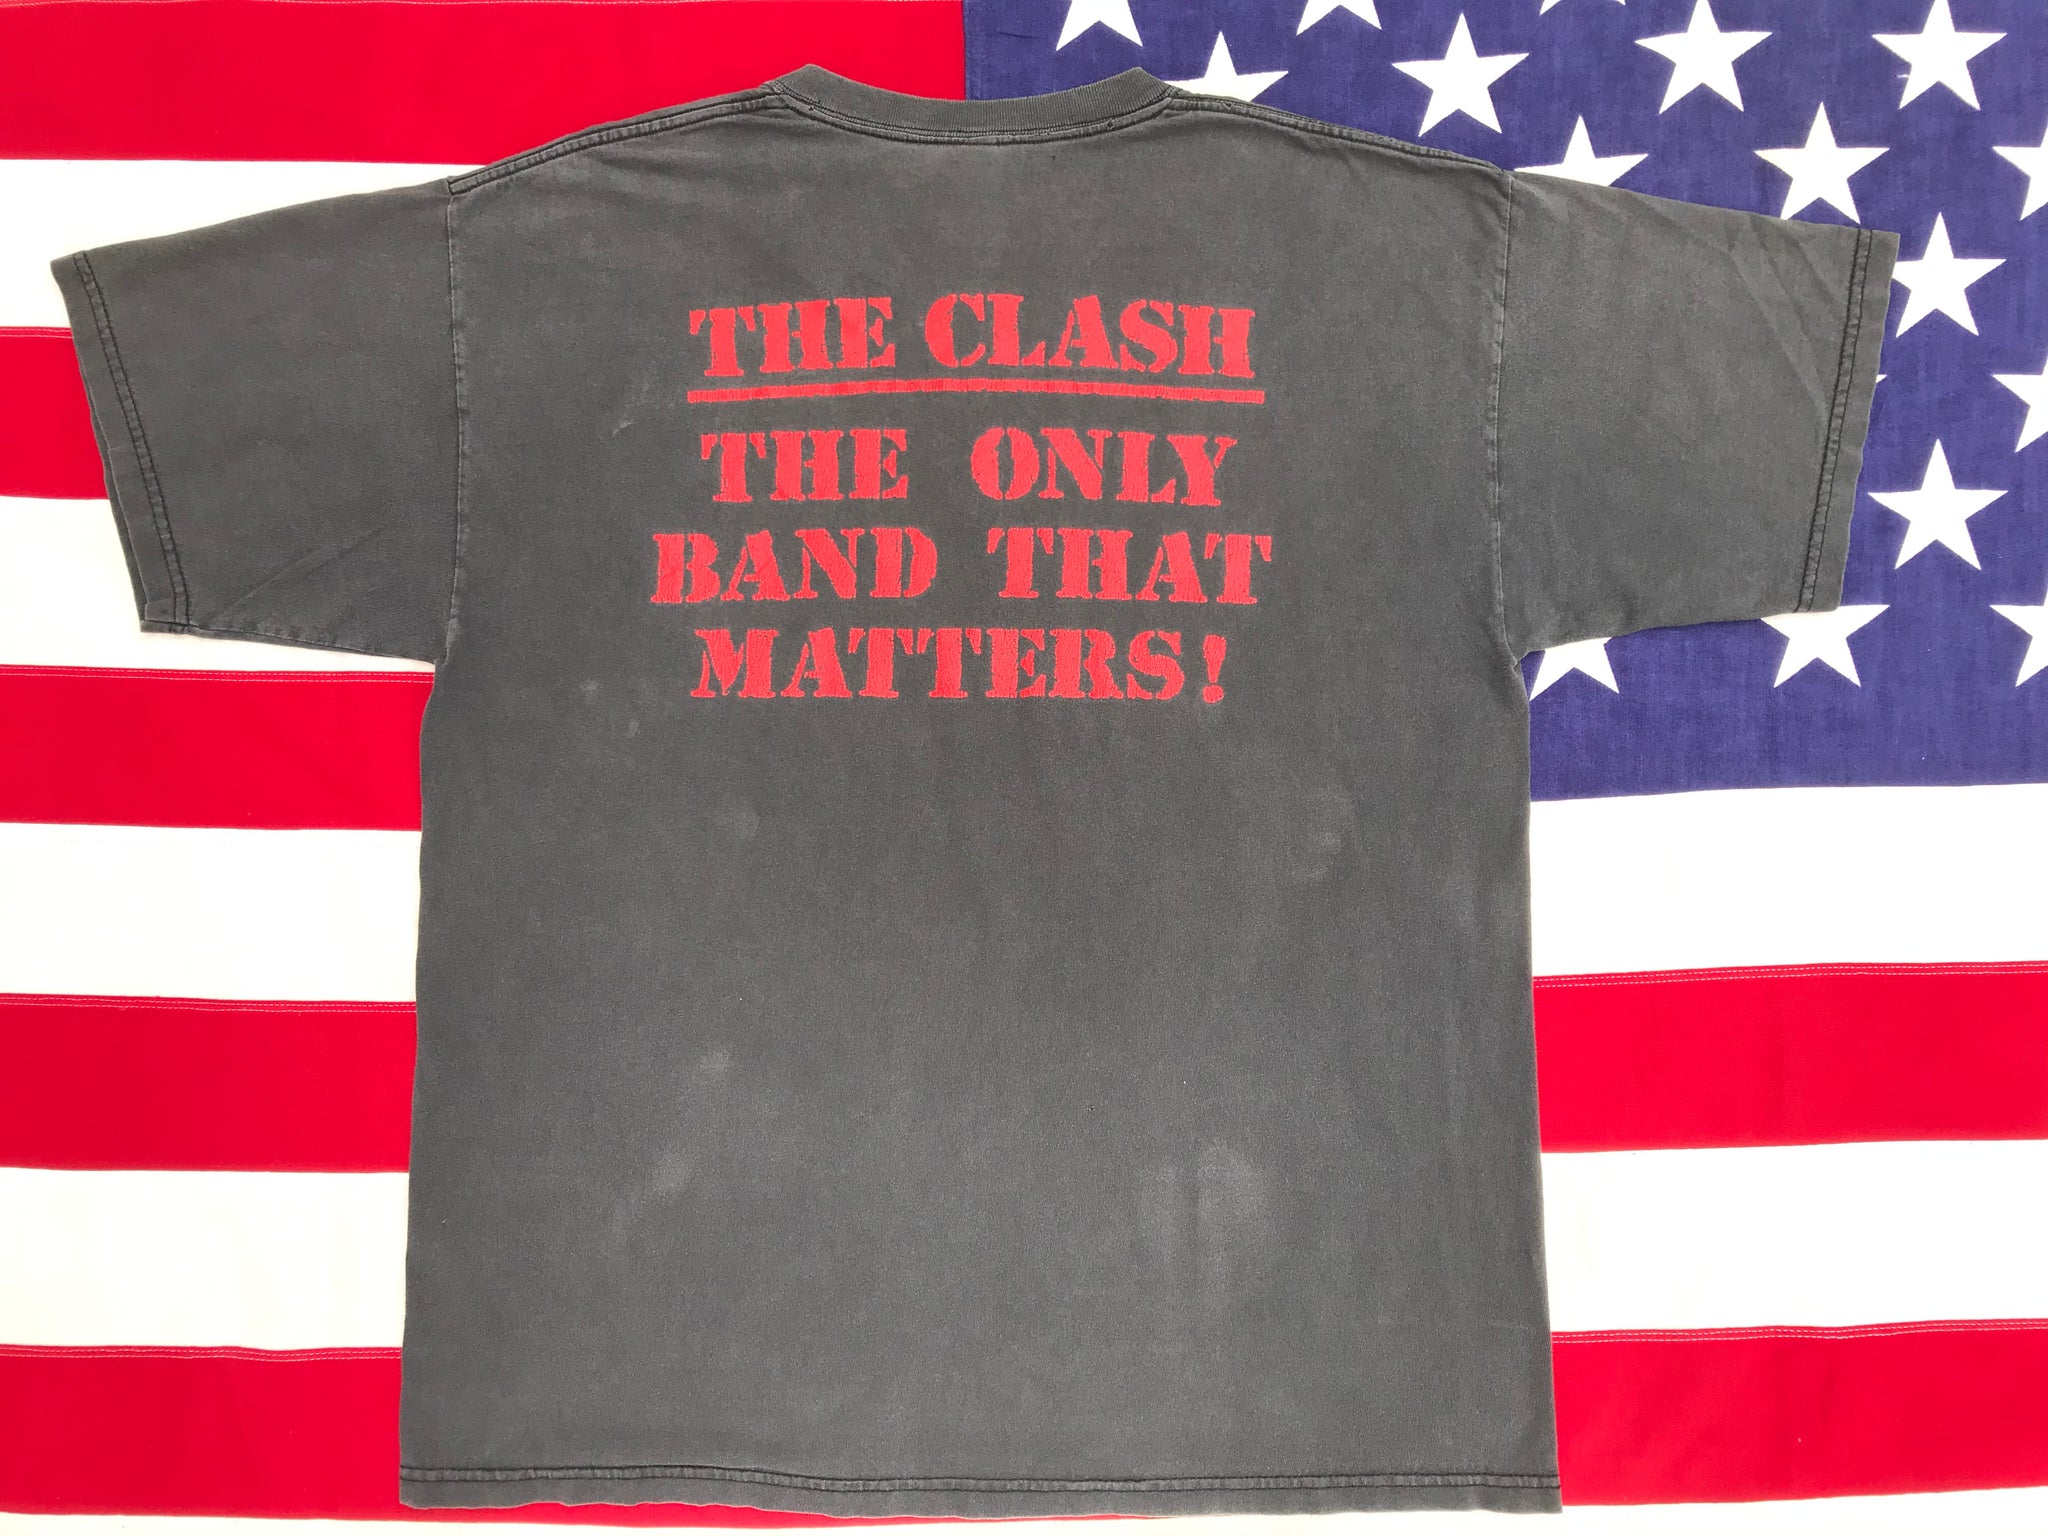 The Clash RARE 80’s 90’s  “ The Only Band That Matters “  Original Vintage Rock T-Shirt by Gildan USA